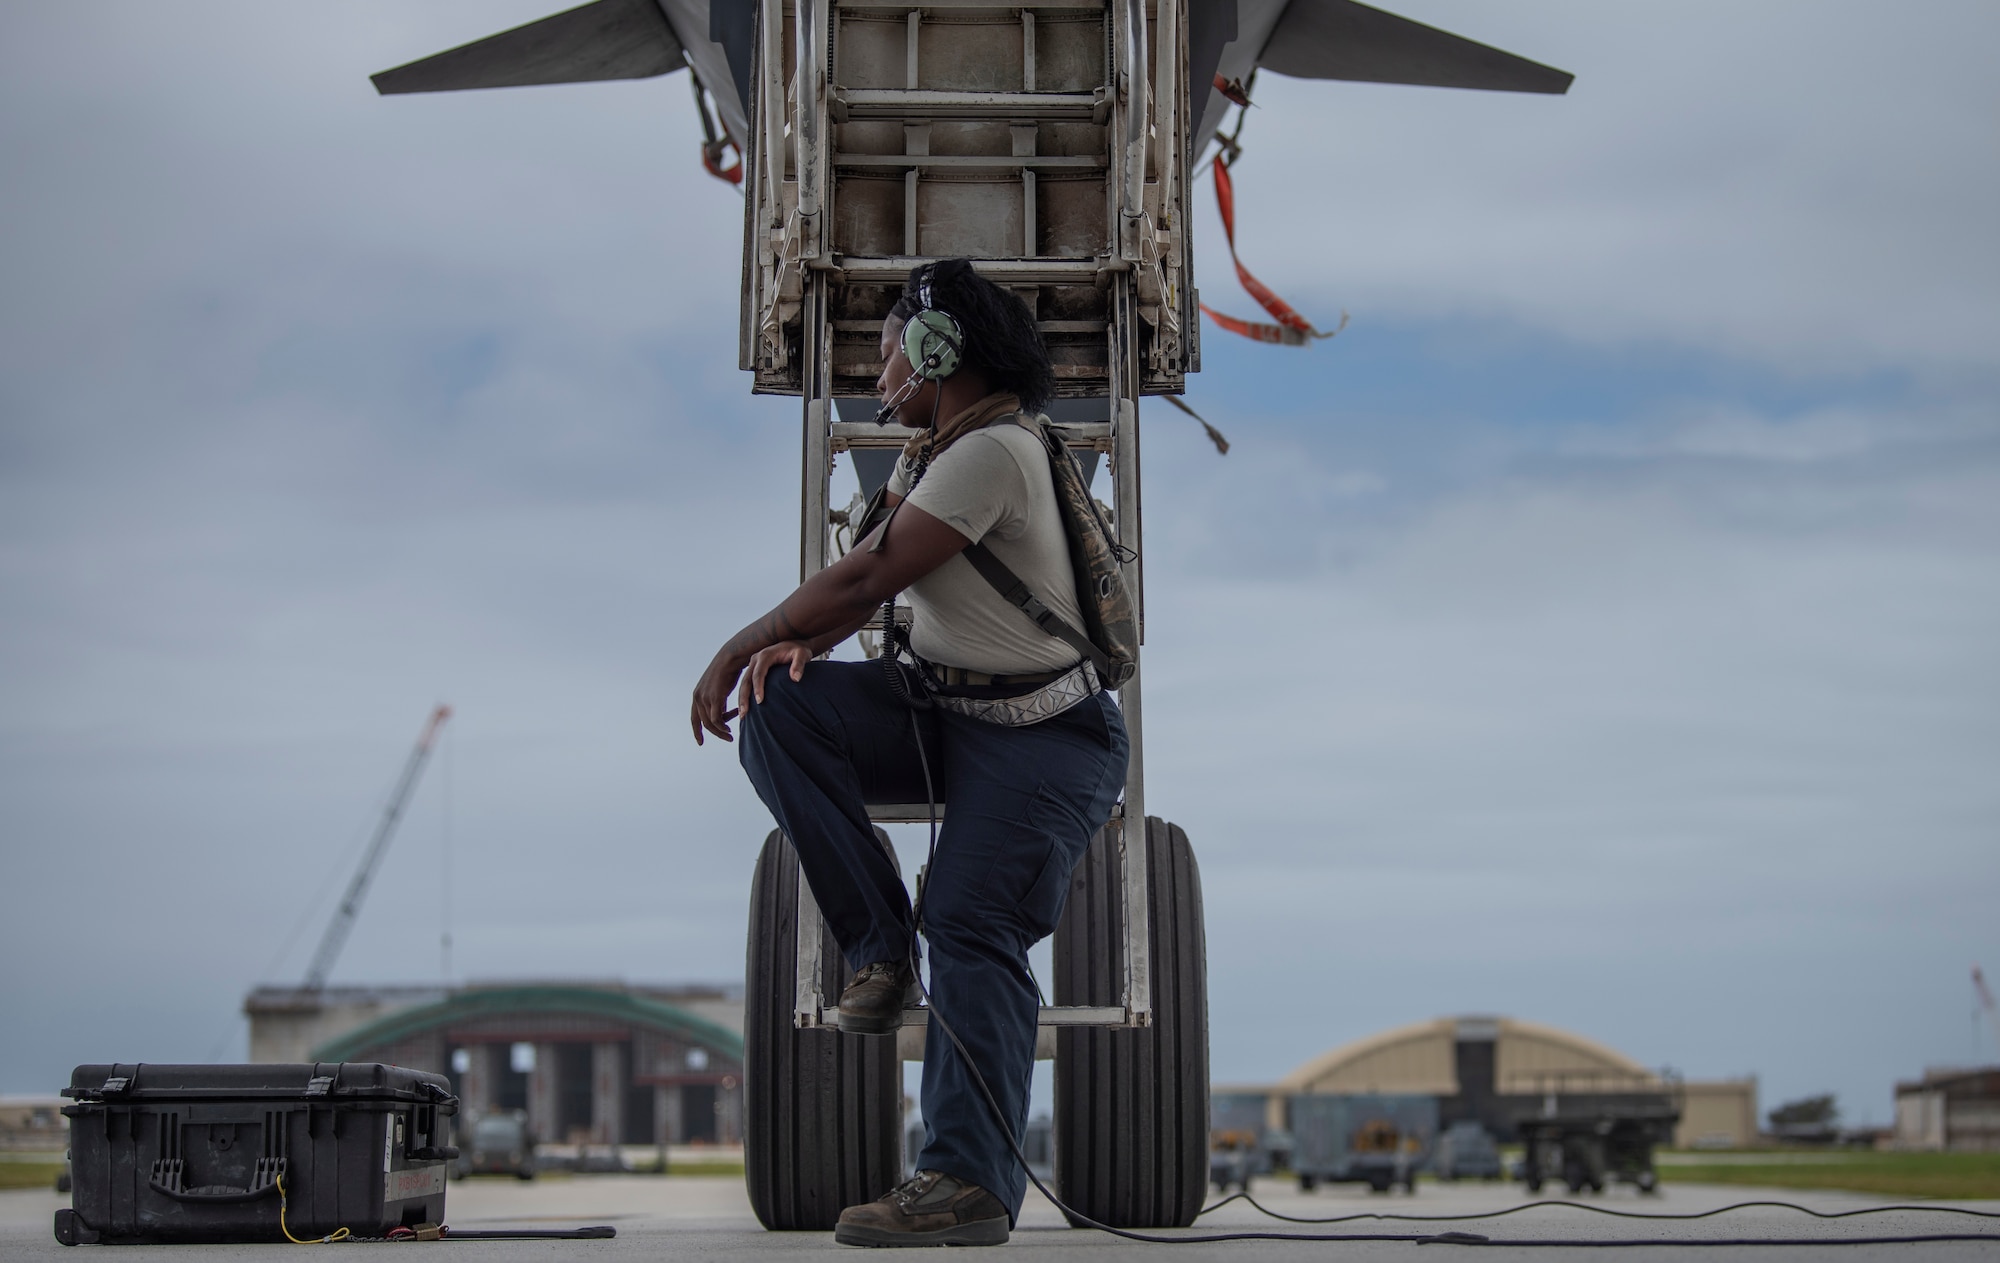 Senior Airman Raisa Ward, 9th Expeditionary Bomb Squadron Aircraft Maintenance Unit avionics technician, sits under a 9th EBS B-1B Lancer at Andersen Air Force Base, Guam, May 5, 2020, after completing maintenance on the aircraft. The 9th EBS, and other units assigned to the 7th Bomb Wing of Dyess Air Force Base, Texas, are deployed to Guam as part of a Bomber Task Force. BTFs contribute to joint force lethality, assure allies and partners, and deter aggression in the Indo-Pacific. (U.S. Air Force photo by Senior Airman River Bruce)